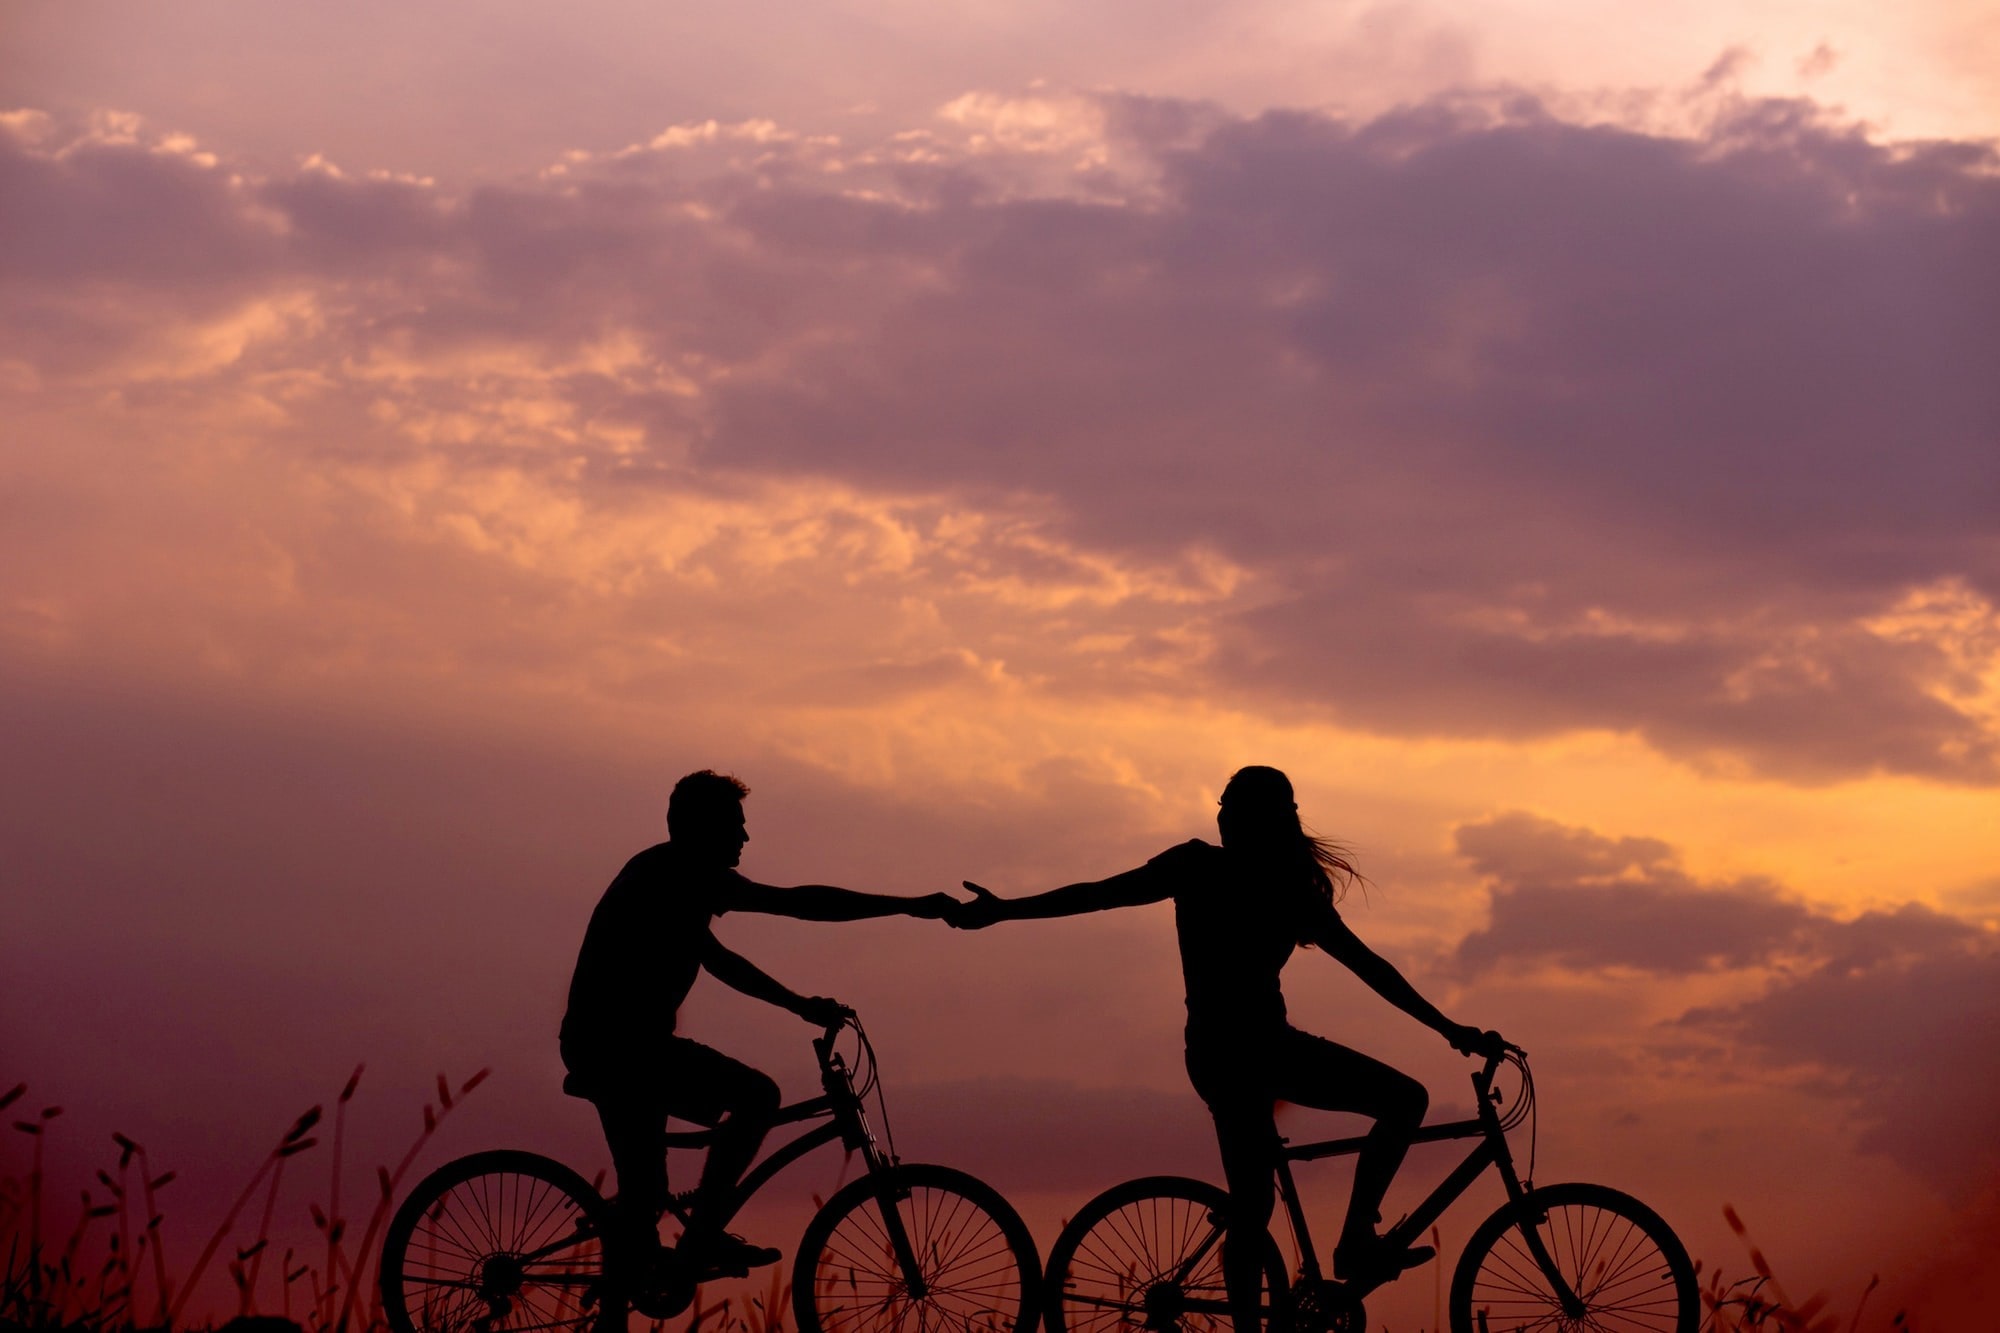 Image of two people riding bicycles. The person in front is reaching back to the person behind her to help and connect with him.